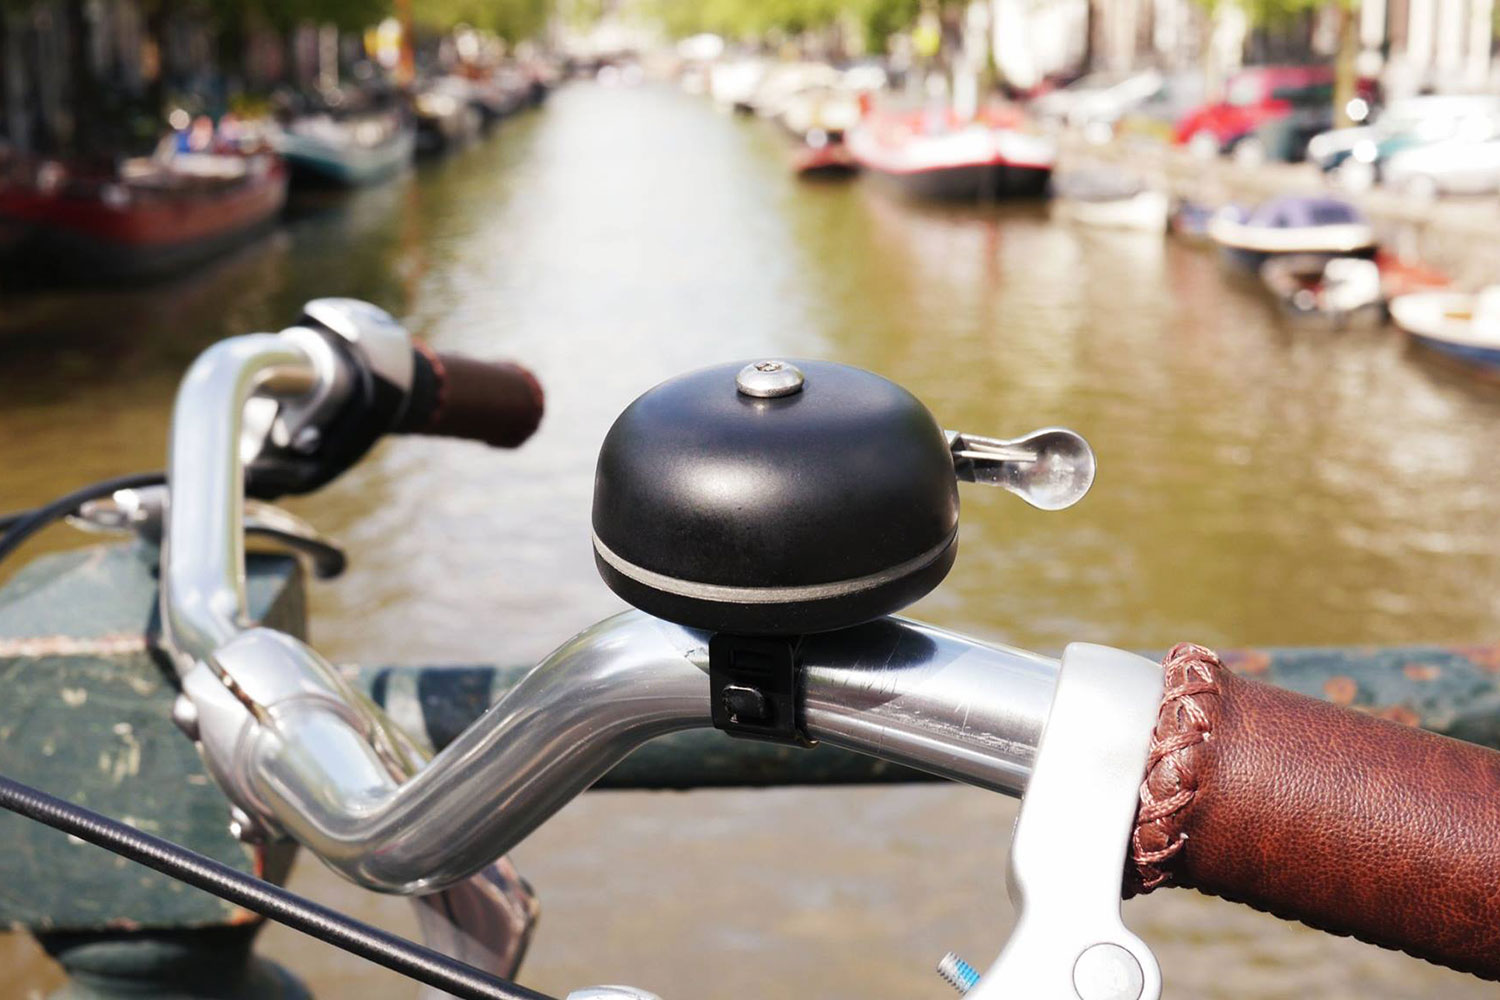 awesome tech you cant buy yet sept 13 2015 pingbell  ping your bell find bike